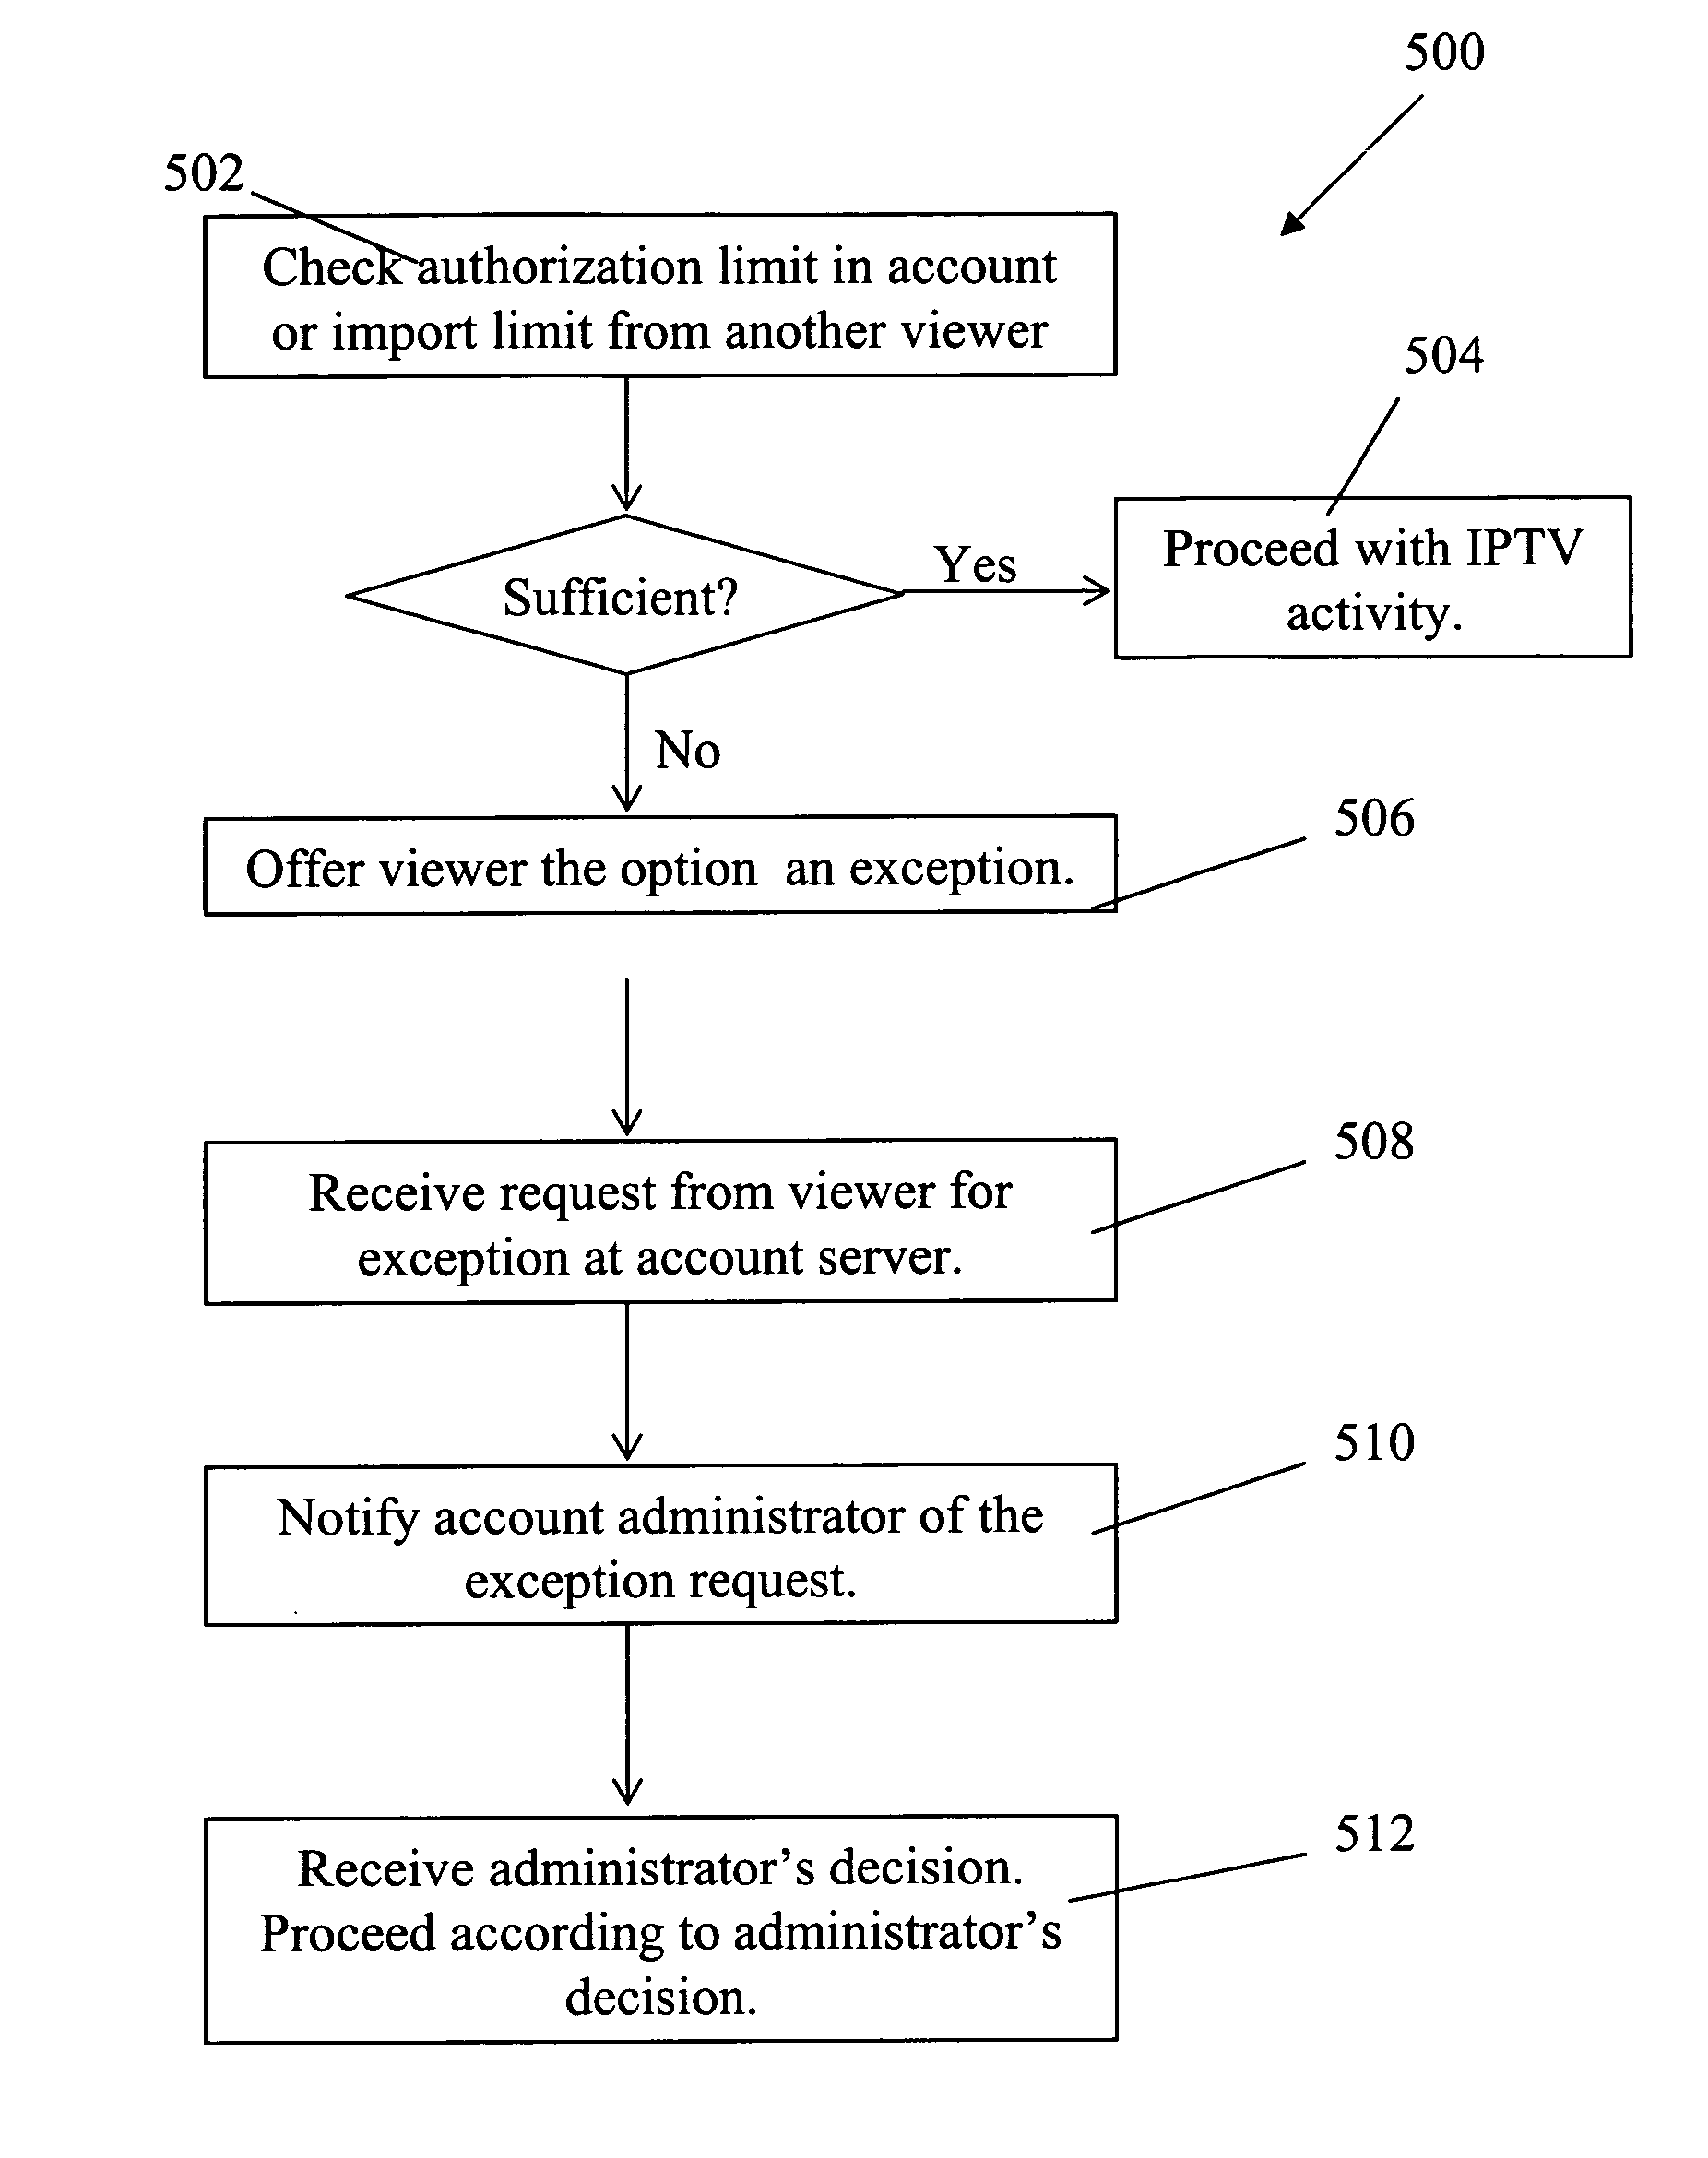 Internet protocol television authorization filtering